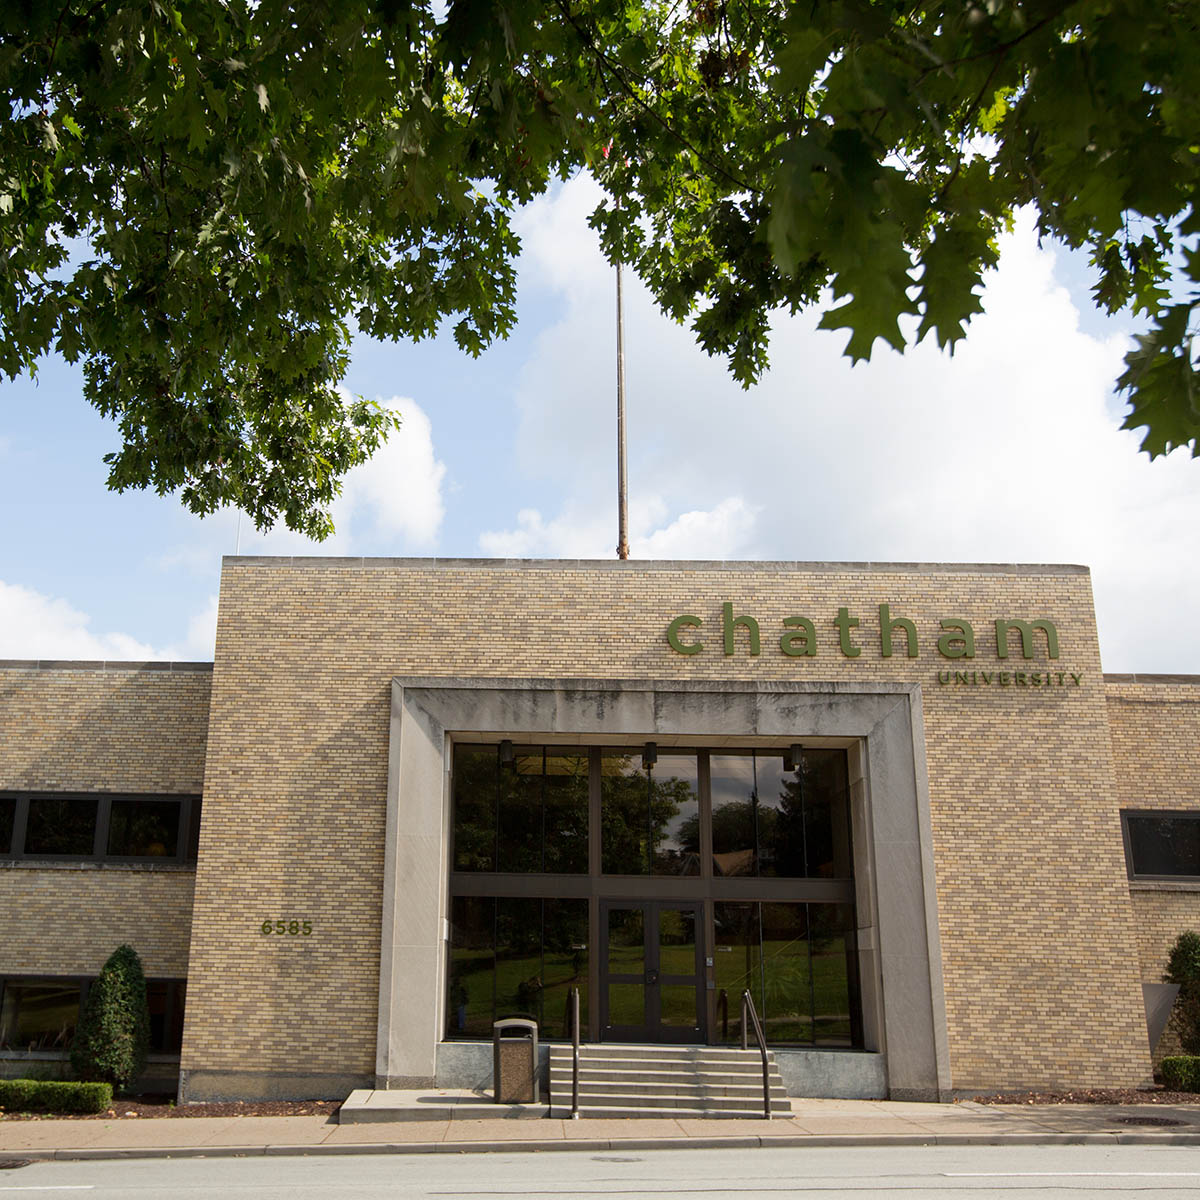 Photo of the Chatham Eastside building